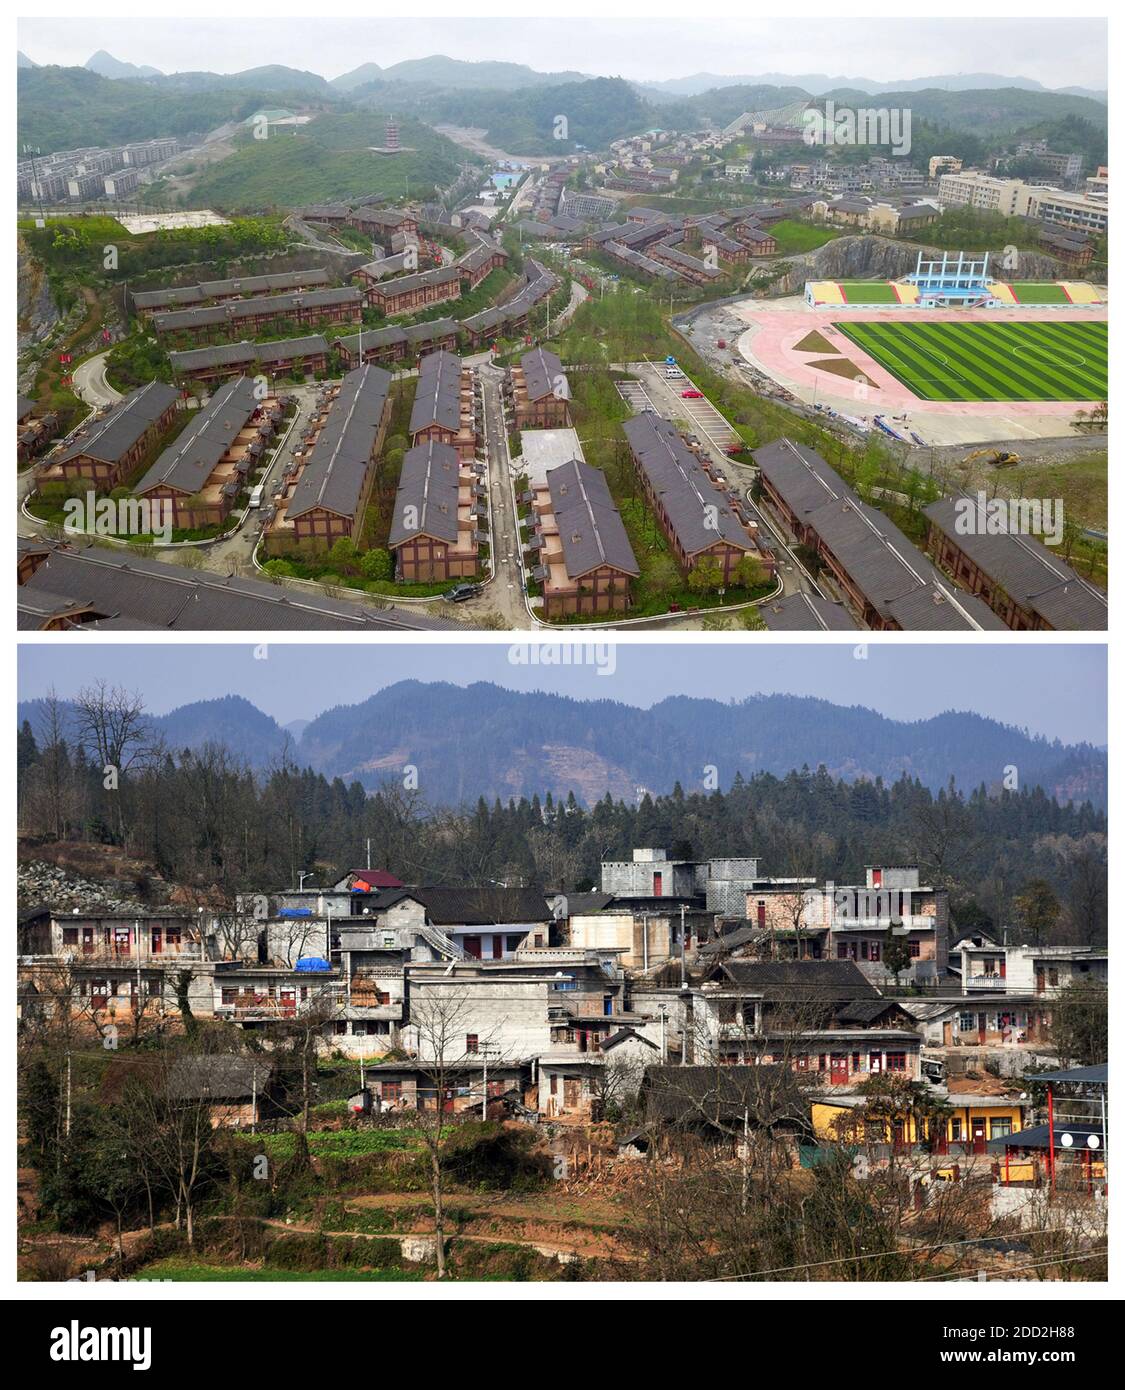 (201124) -- GUIYANG, Nov. 24, 2020 (Xinhua) -- In this combo photo, the upper part taken on June 6, 2019 by Yang Wenbin shows the new look of the Ameiqituo Town and the lower part taken on Jan. 15, 2018 by Chen Yalin shows the Sanbao Village before relocation in Qinglong County, southwest China's Guizhou Province. China has achieved the feat of removing all remaining counties from the country's poverty list. The last nine impoverished counties, all in southwest China's Guizhou Province, have eliminated absolute poverty, the provincial government announced on Monday. This means that all 832 Stock Photo